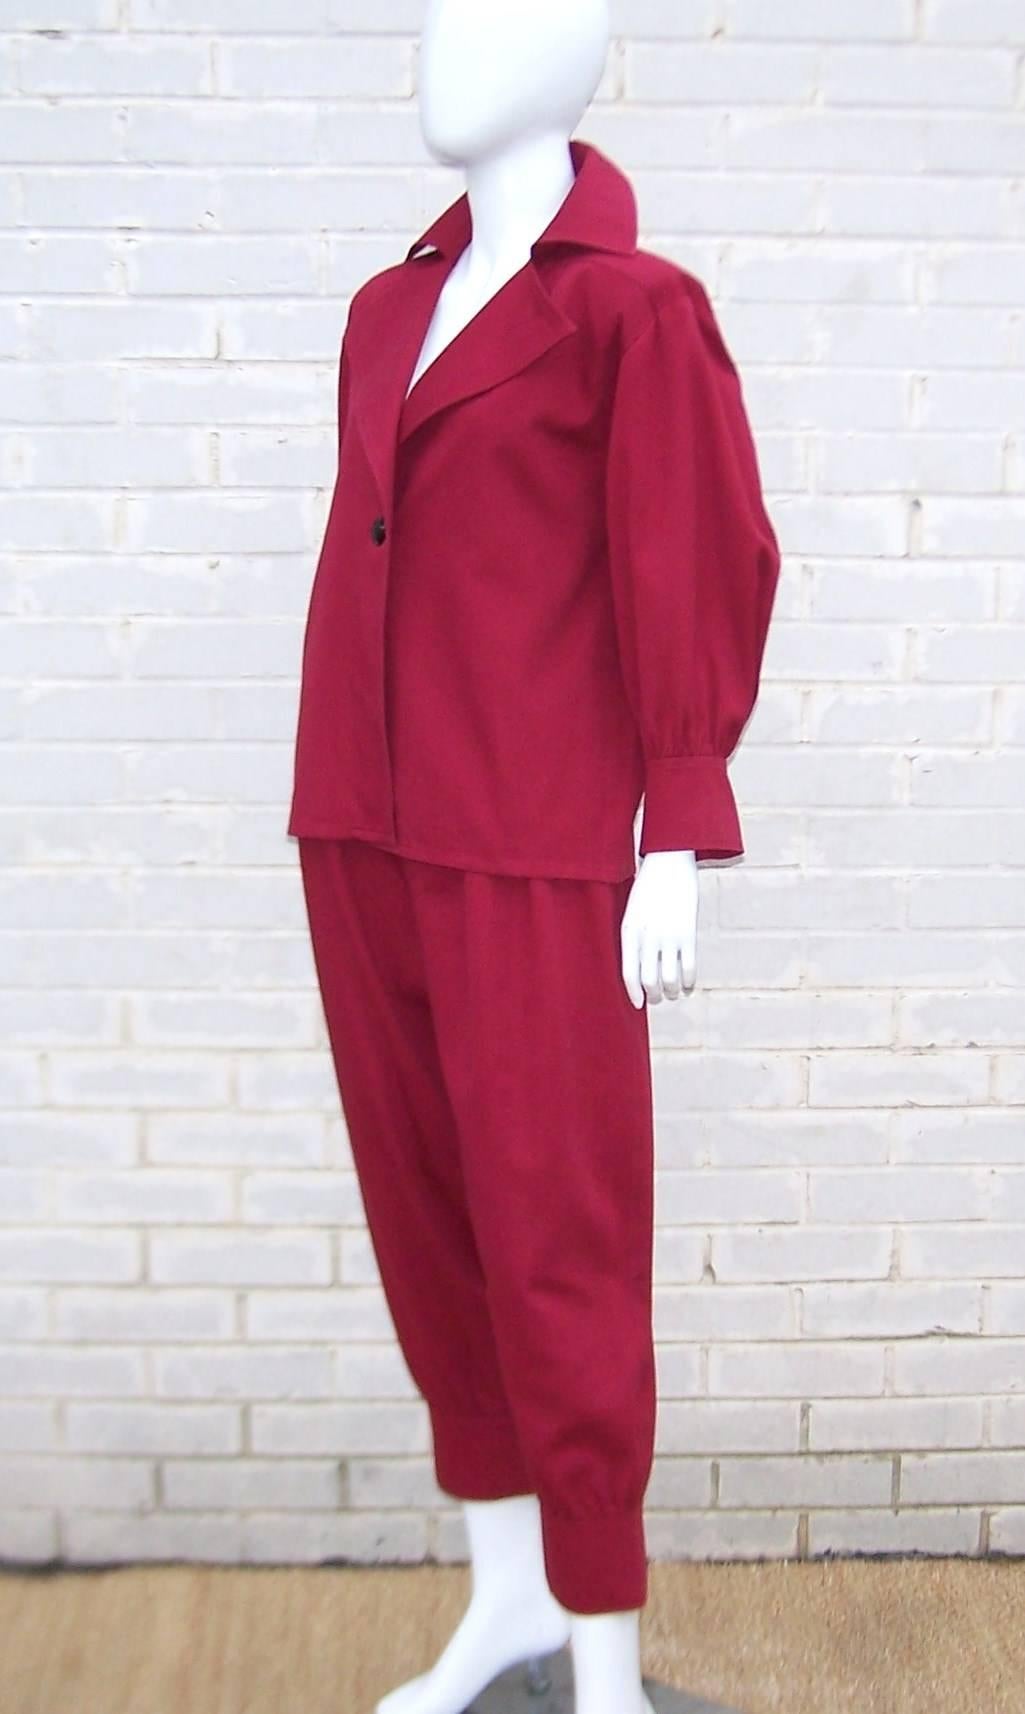 Is it possible to be uber stylish and whimsically playful at the same time?  Yes!  And this Yves Saint Laurent cranberry red heavy weight cotton suit proves it with one playful detail after another.  This design has all the hallmarks of an adult